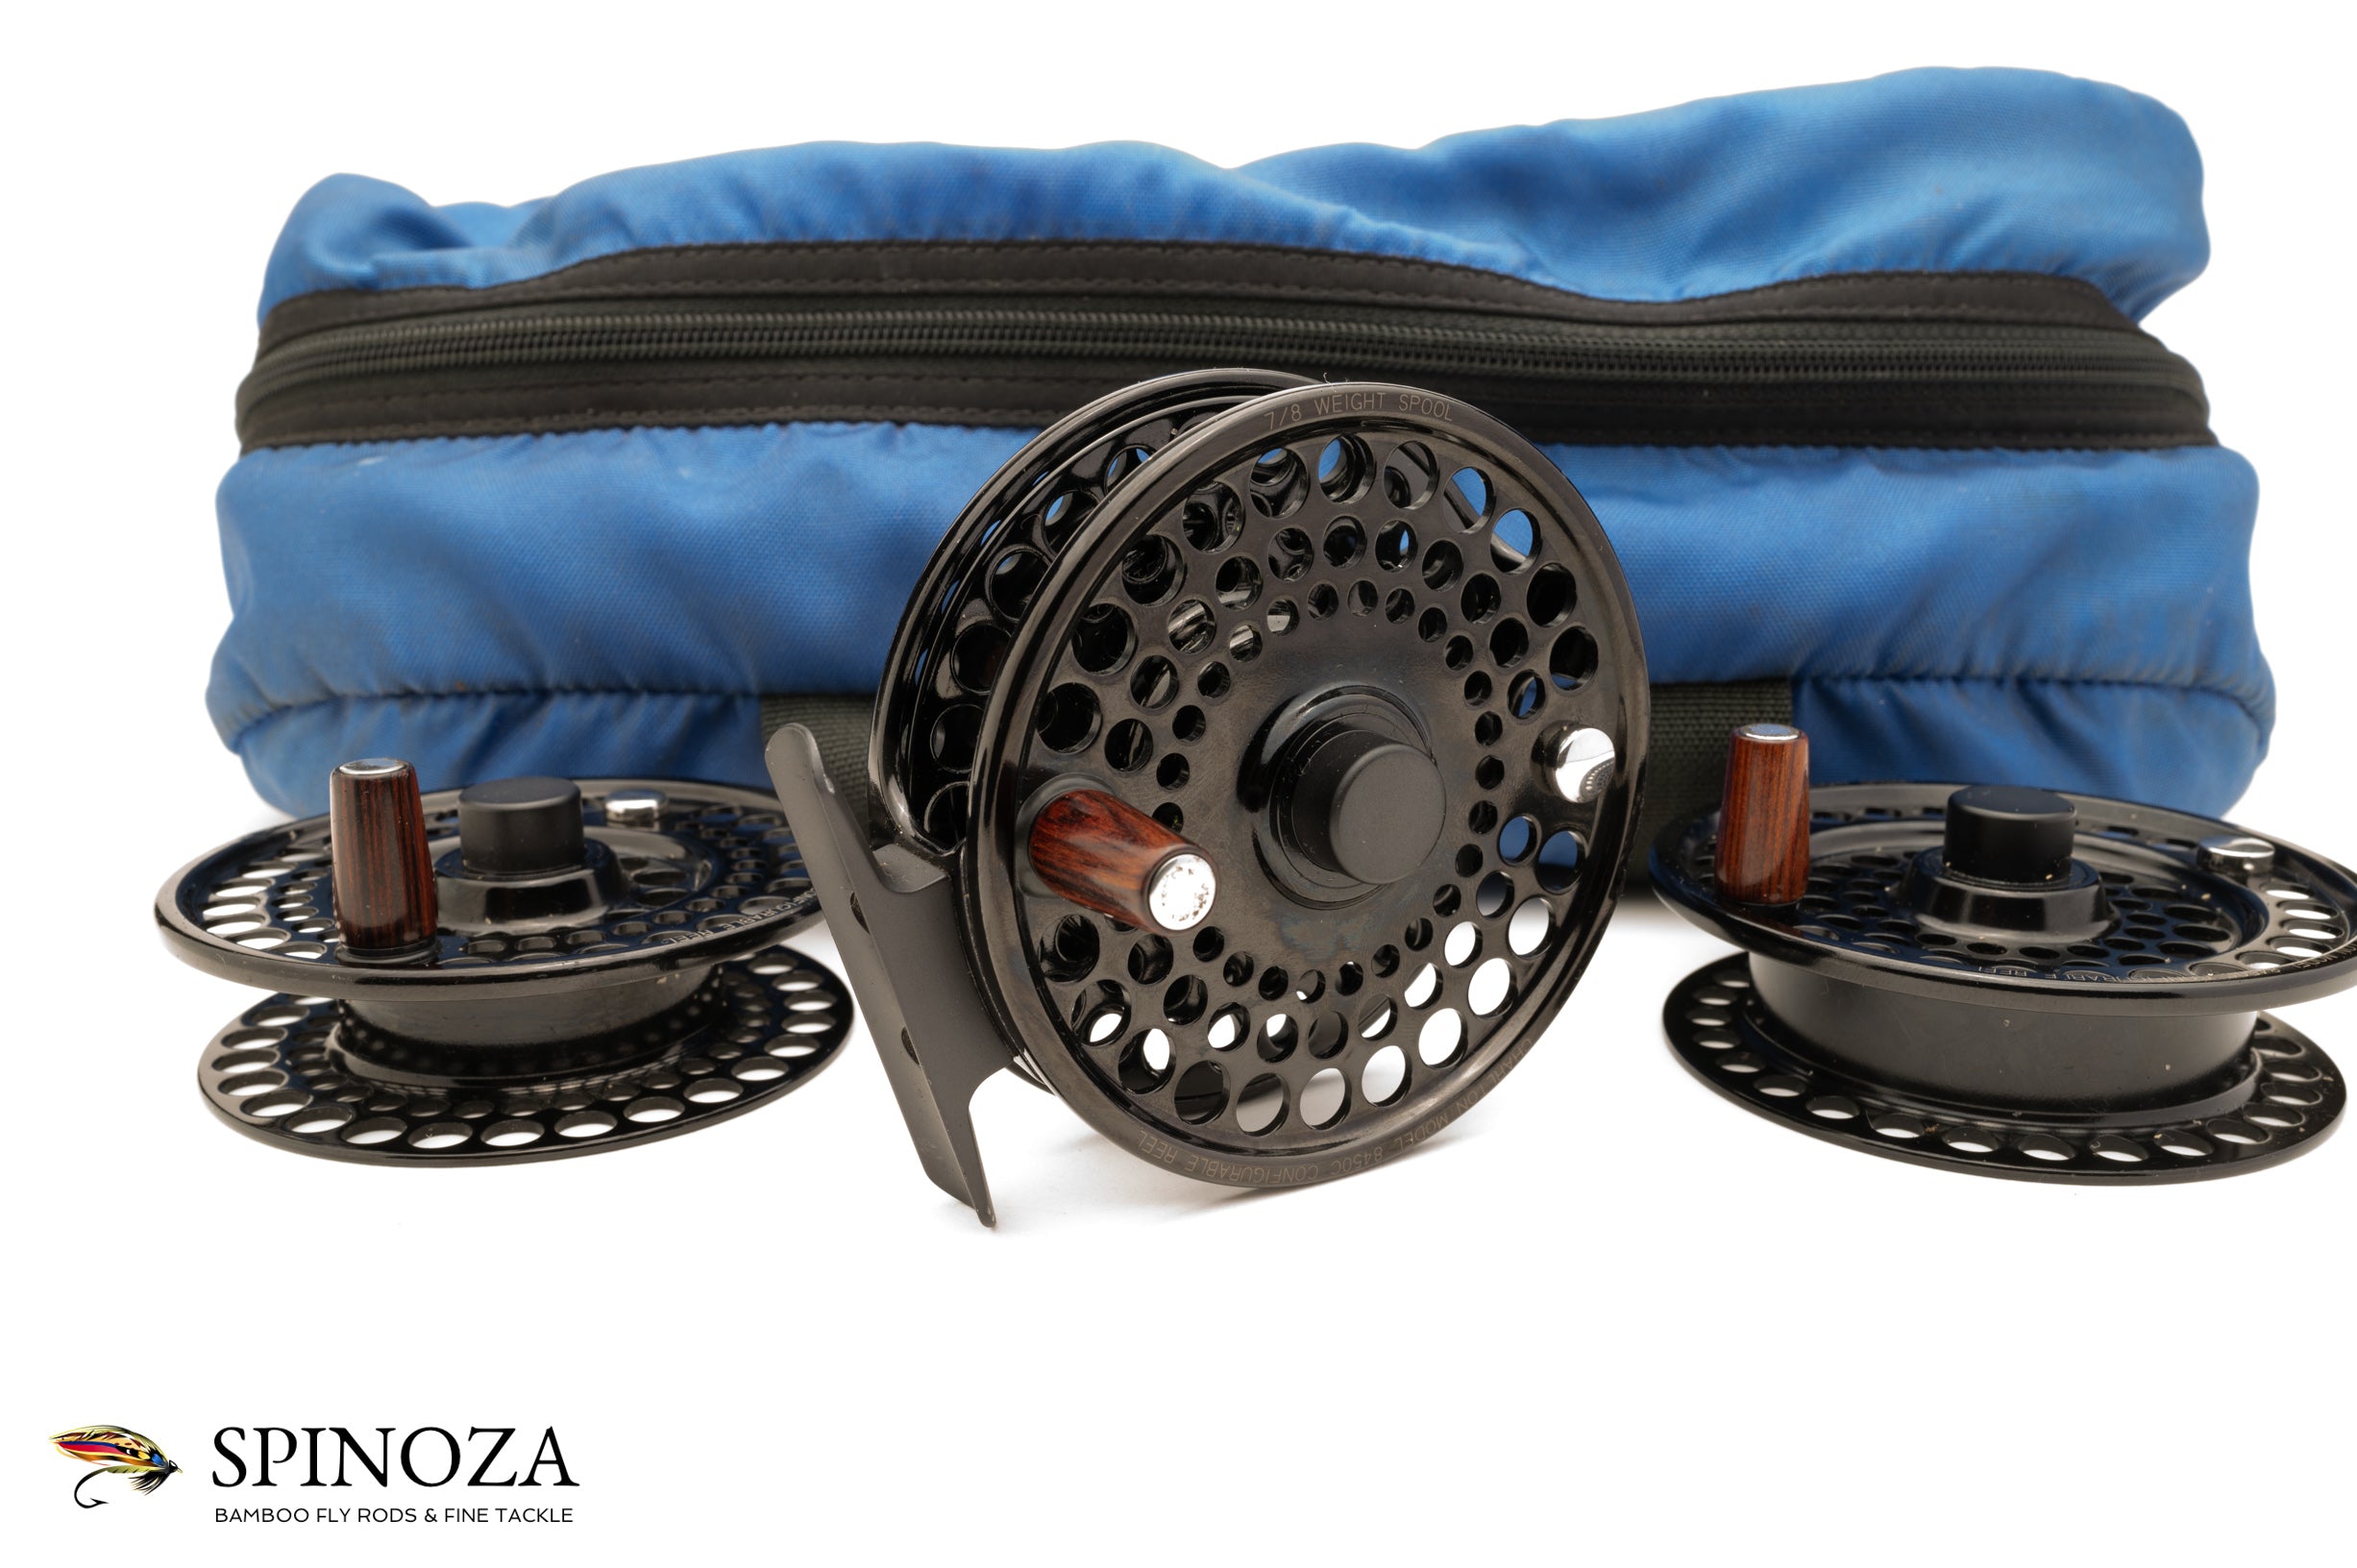 Charlton 8450CC Fly Reel with 3/4, 5/6, and 7/8 Spools - Spinoza